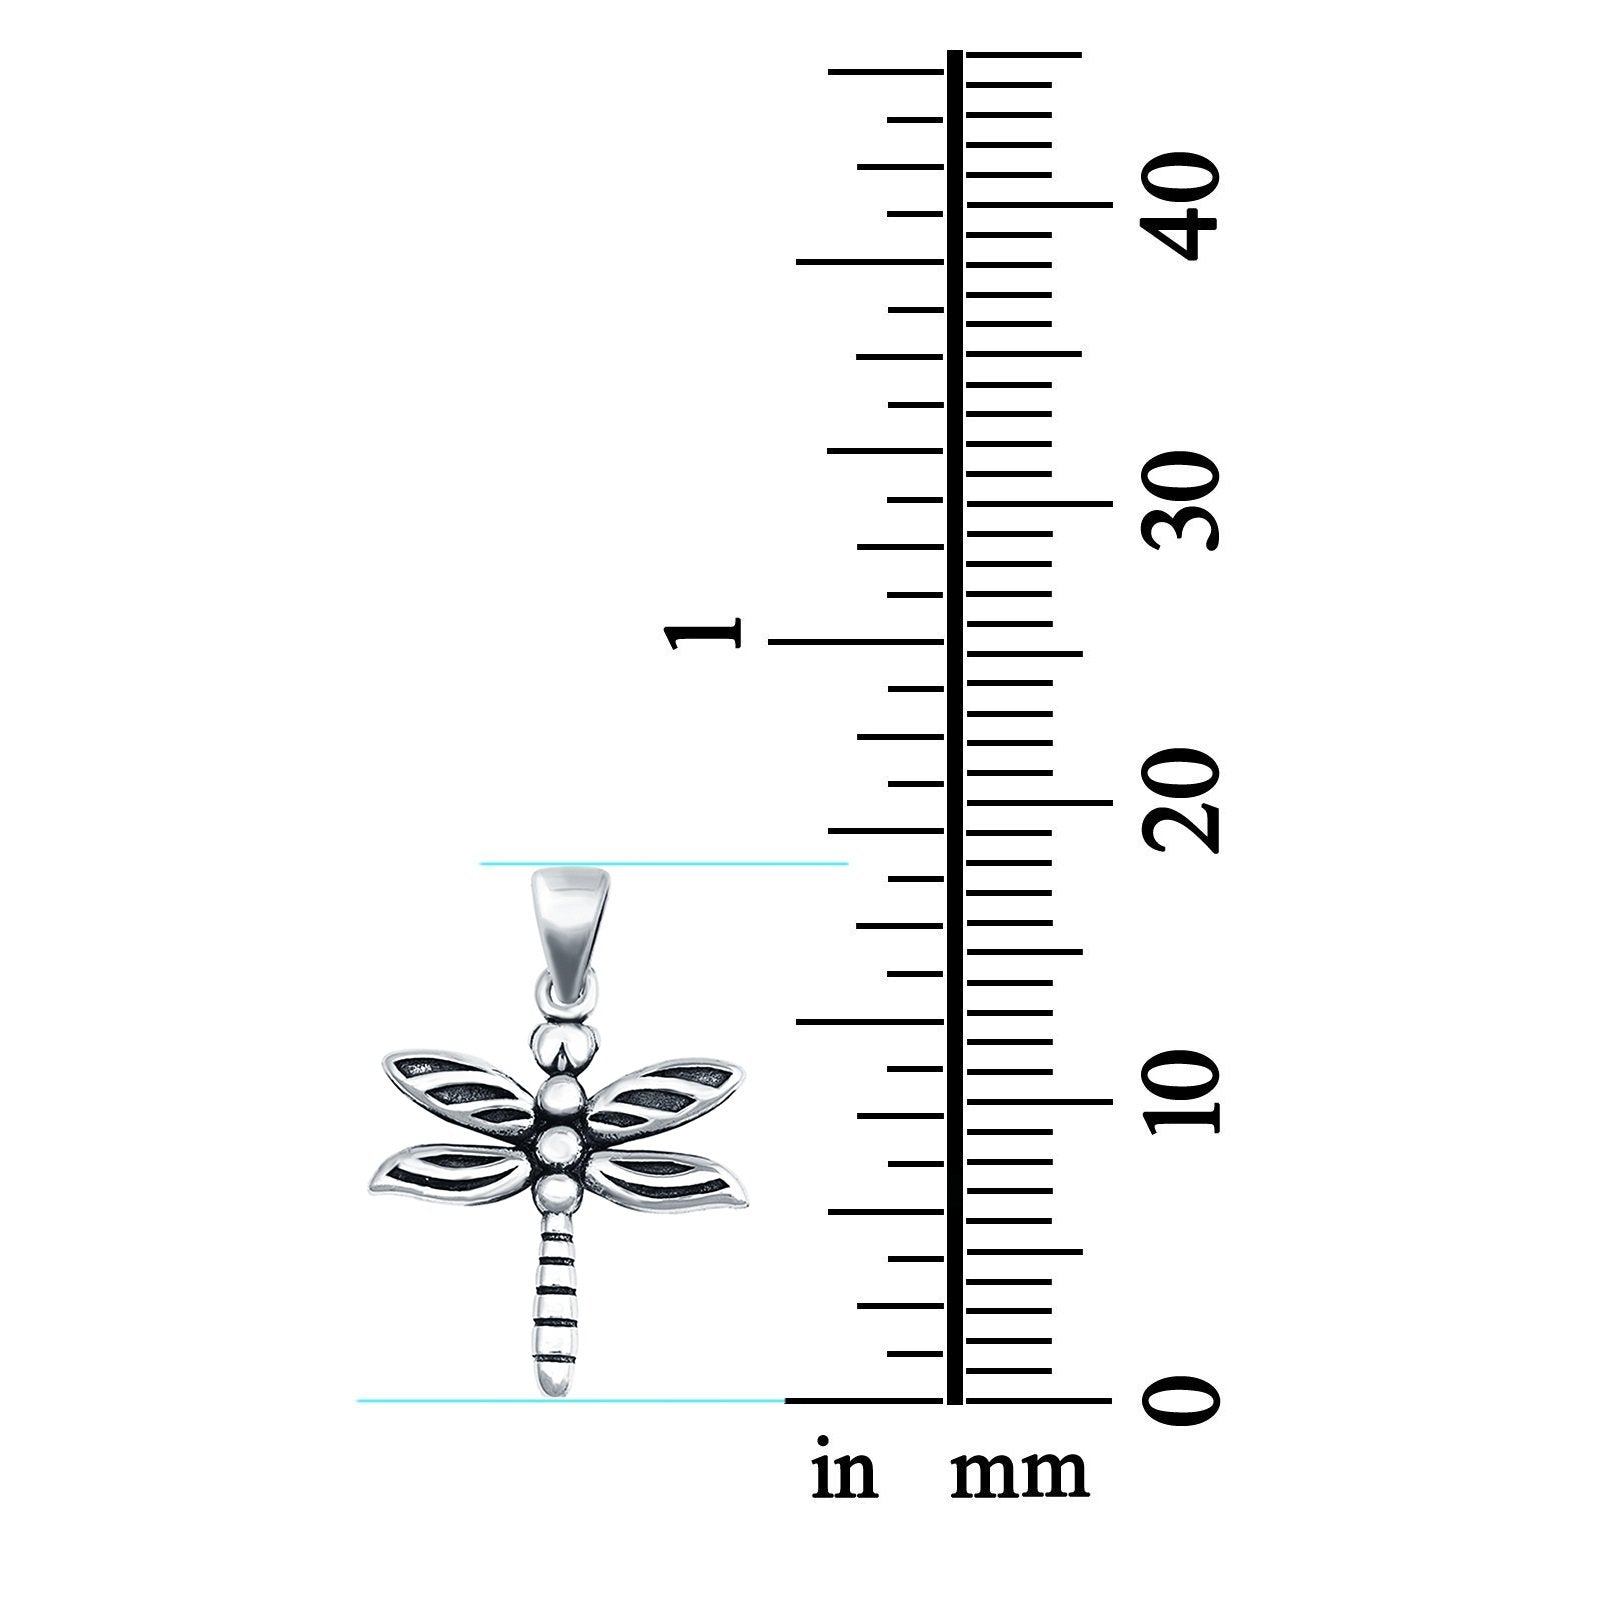 Dragonfly Charm Pendant Fashion Jewelry 925 Sterling Silver